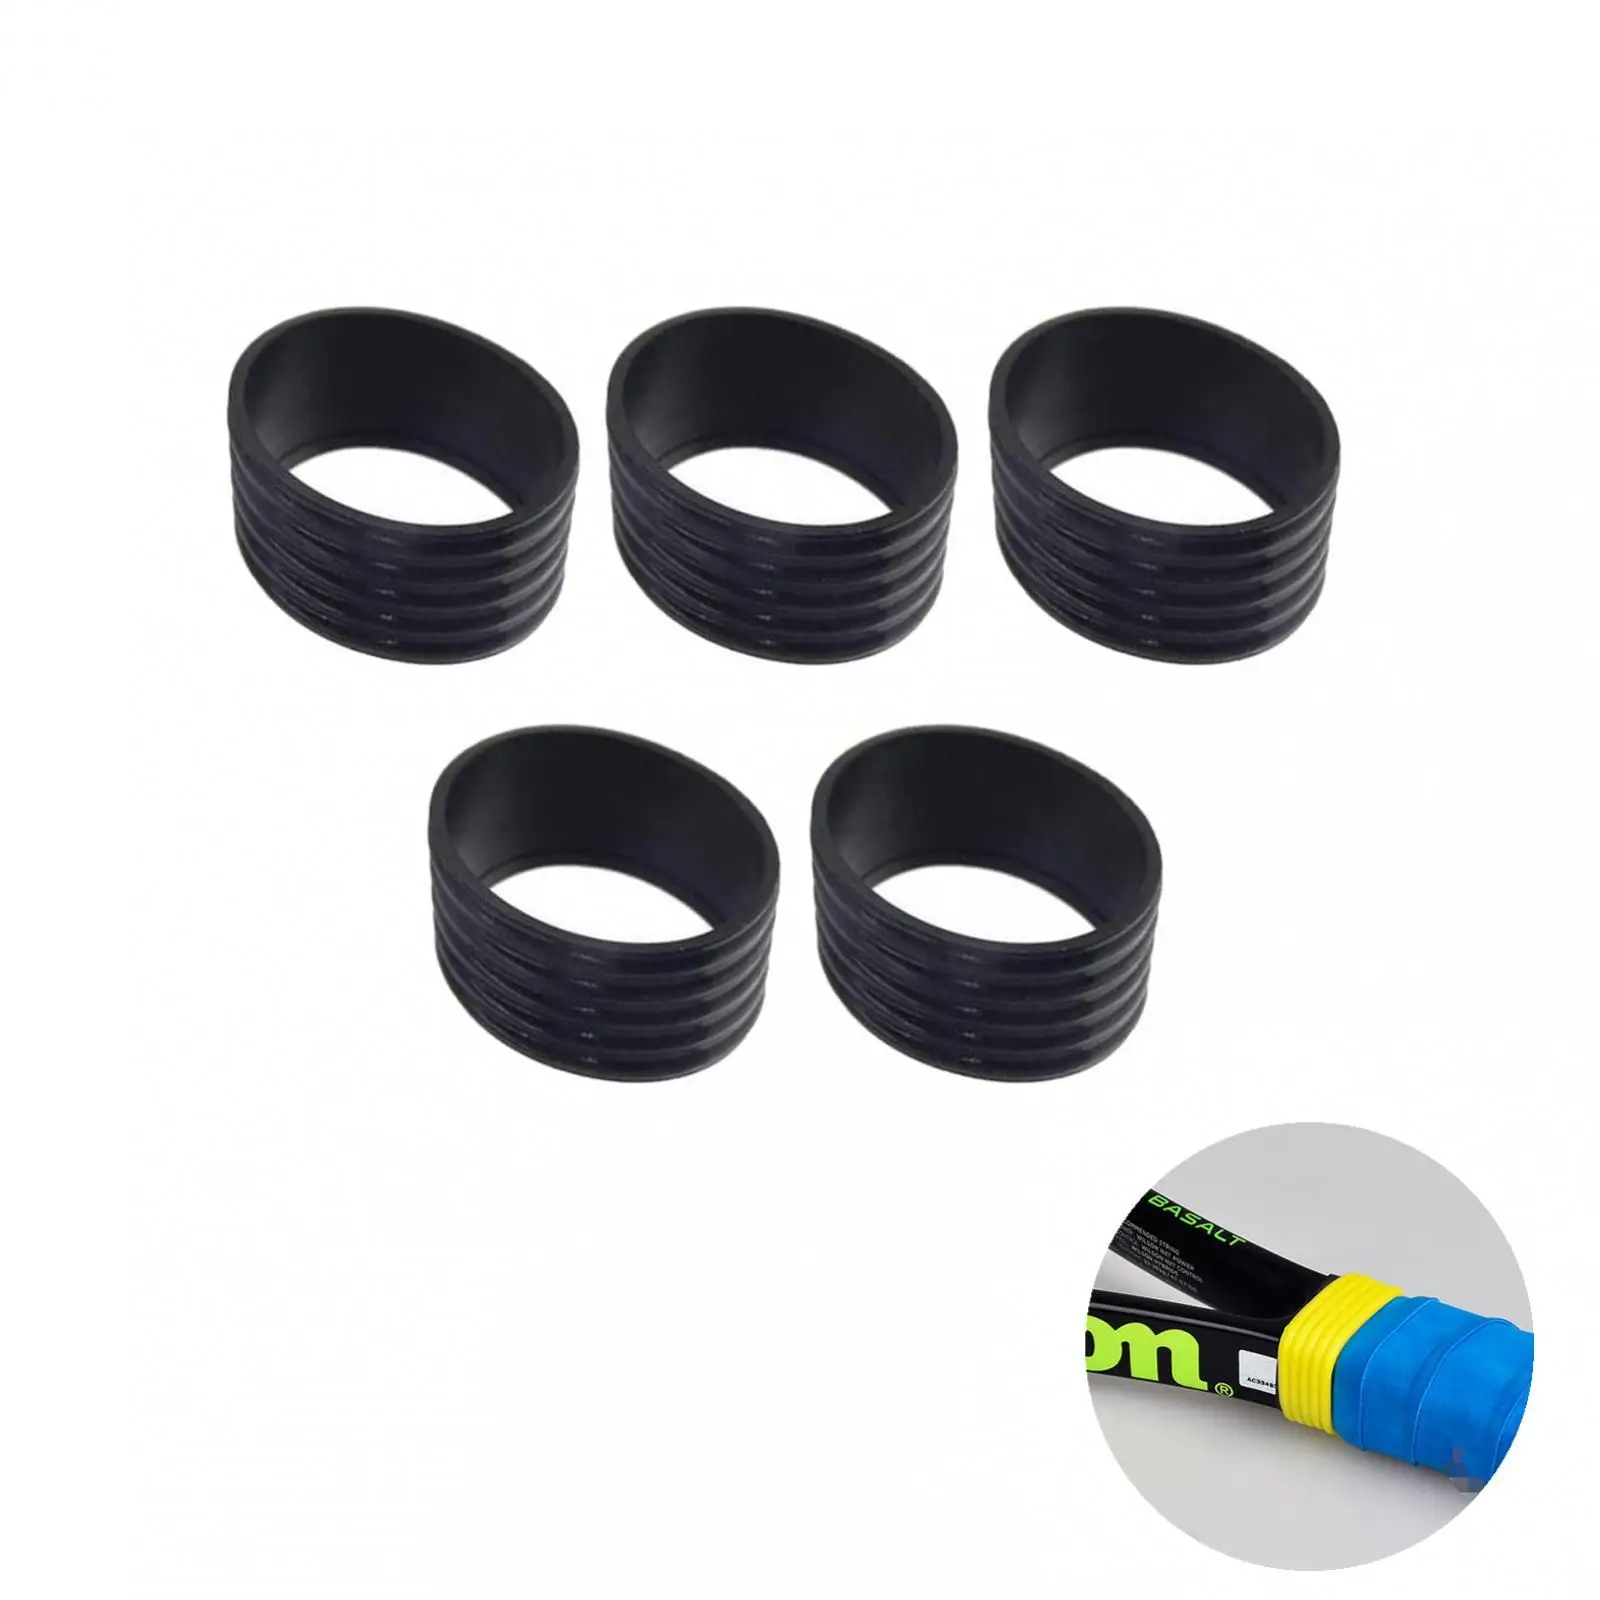 5x Rubber Grip Bands for Tennis Racquet, Squash Racket, Fishing Pole - to Hold